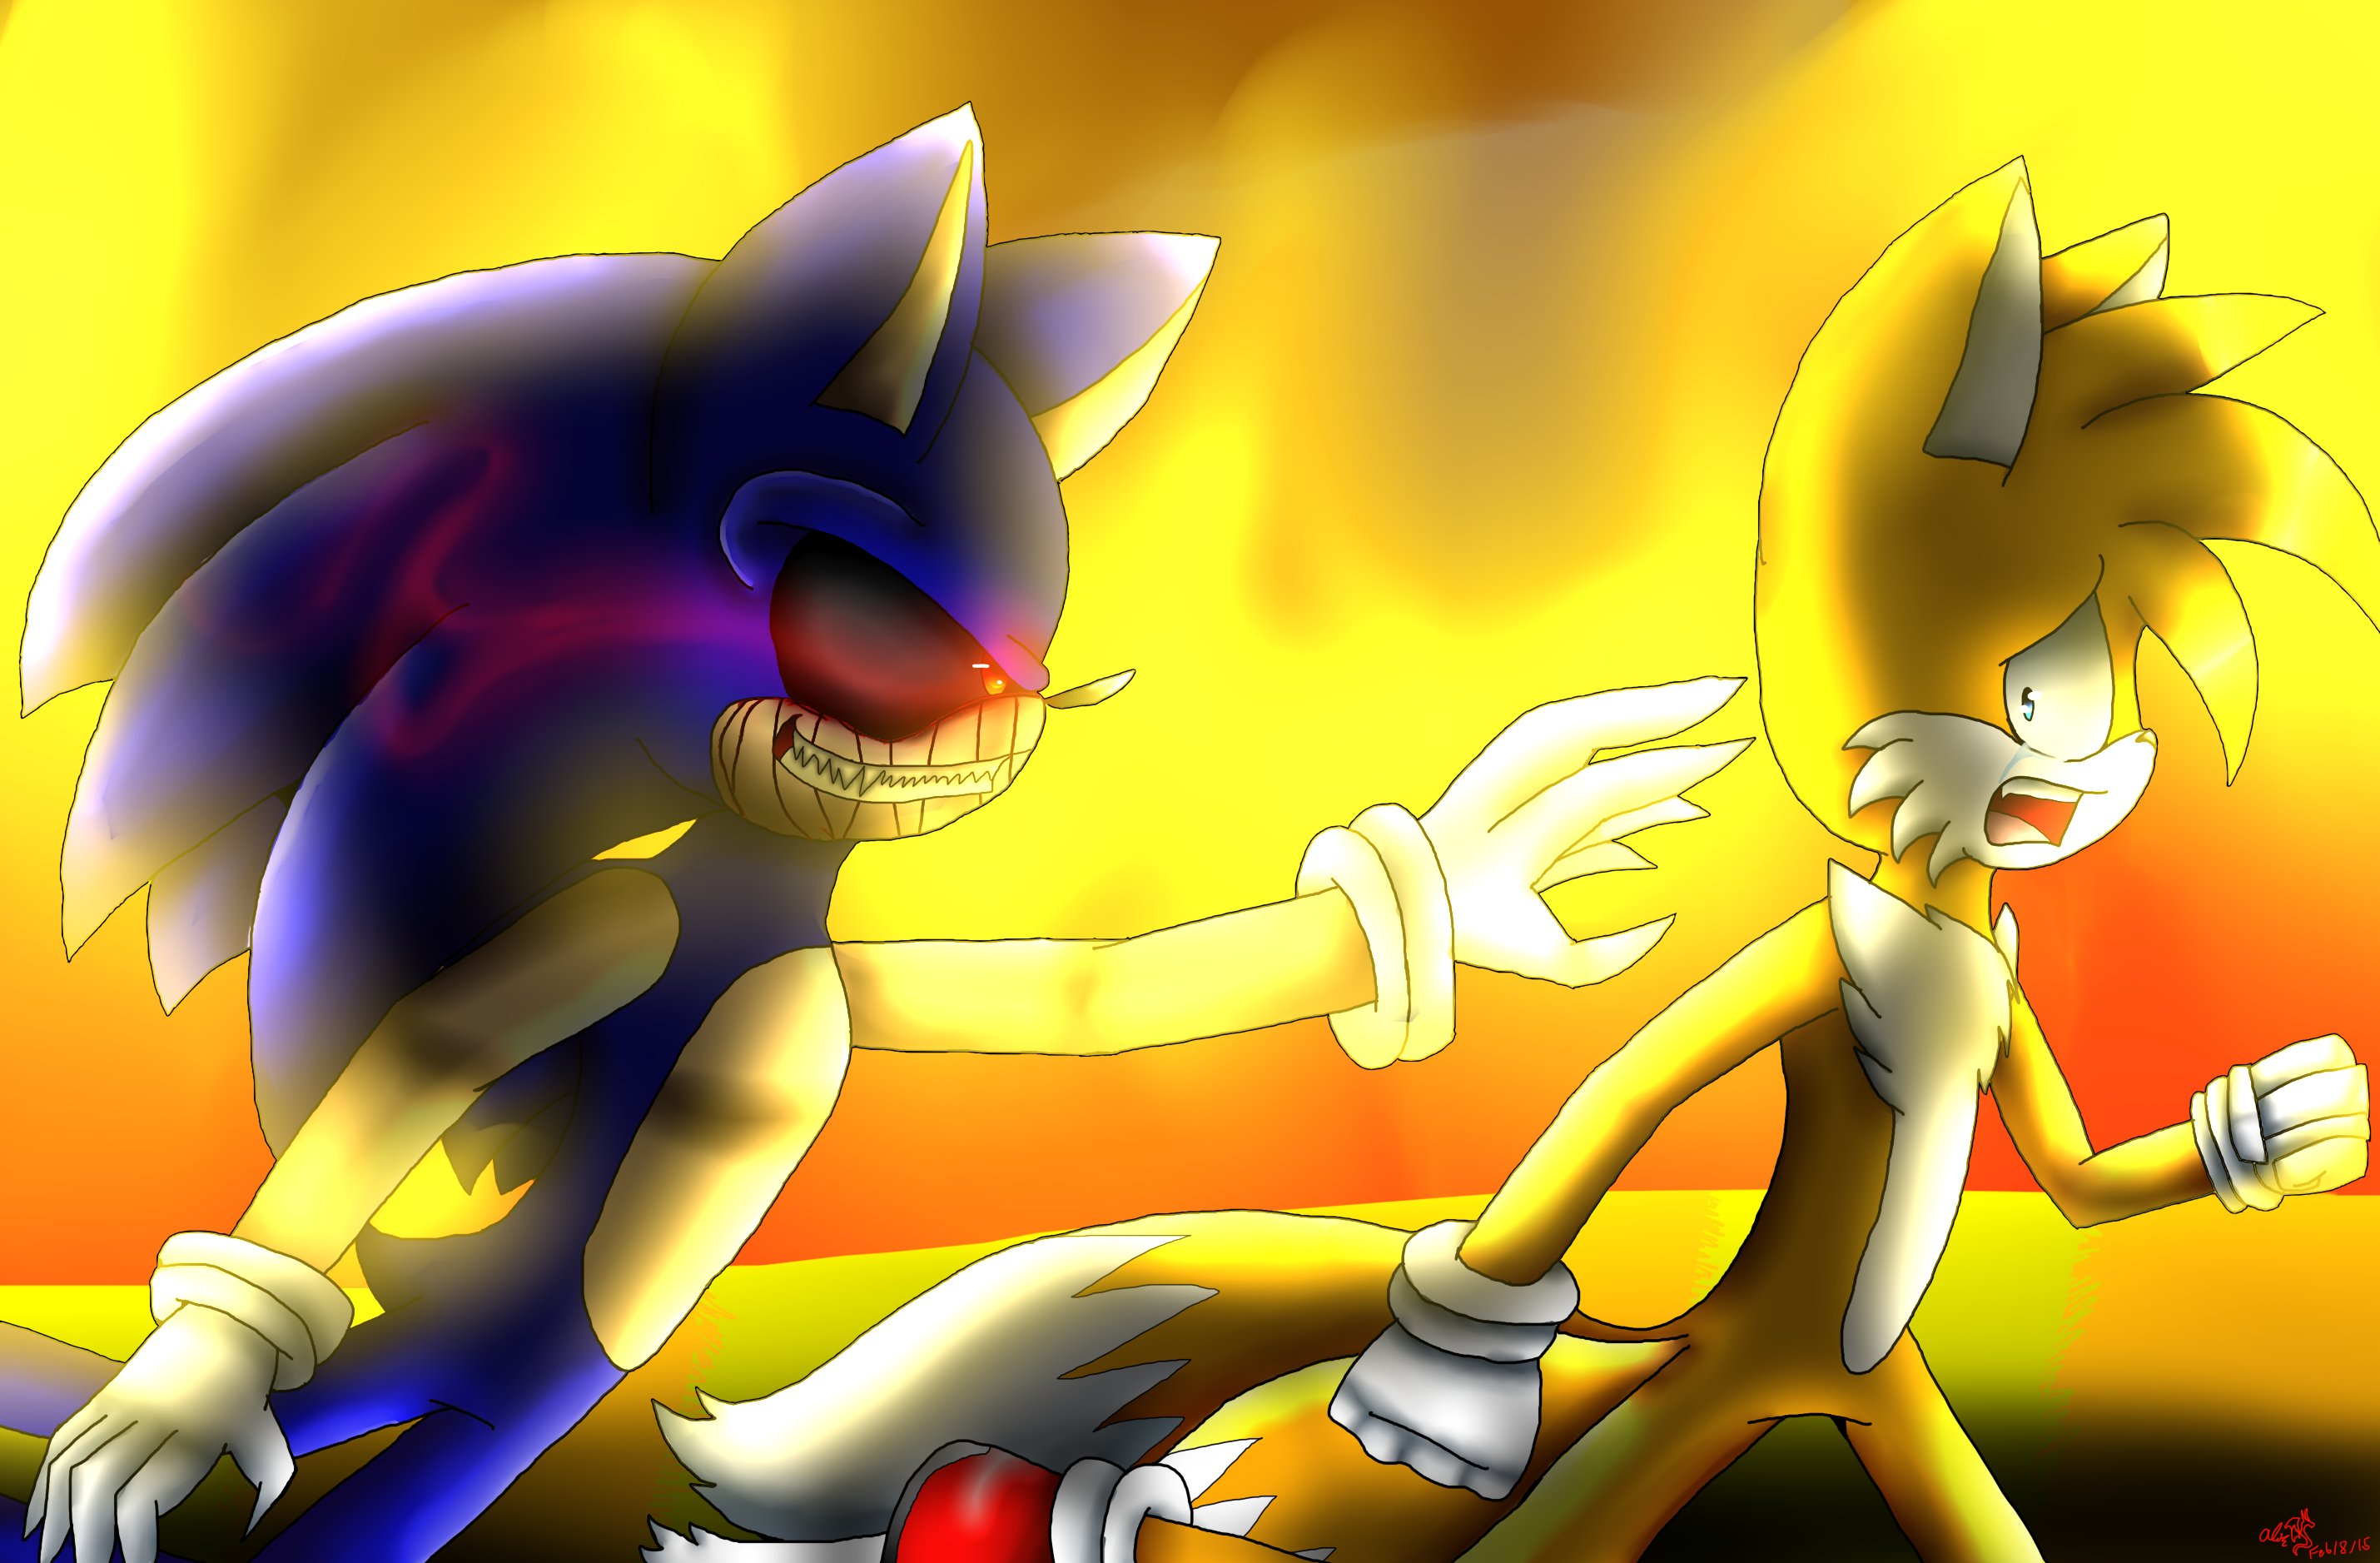 Tails Annoying Tails.exe by Y0urLocalArtist on Sketchers United